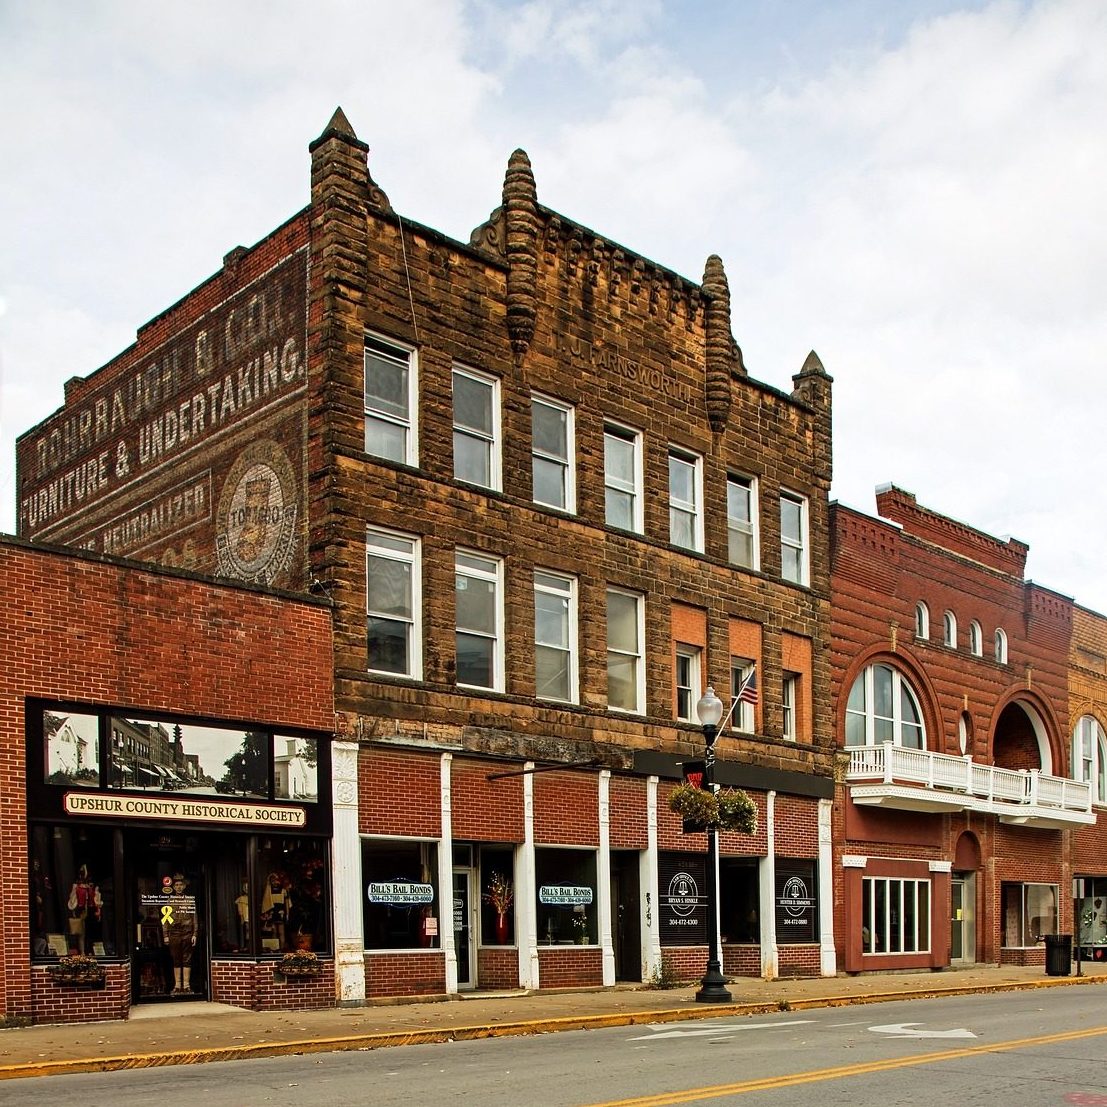 Photograph of quant, older buildings on a mainstreet, West Virginia.